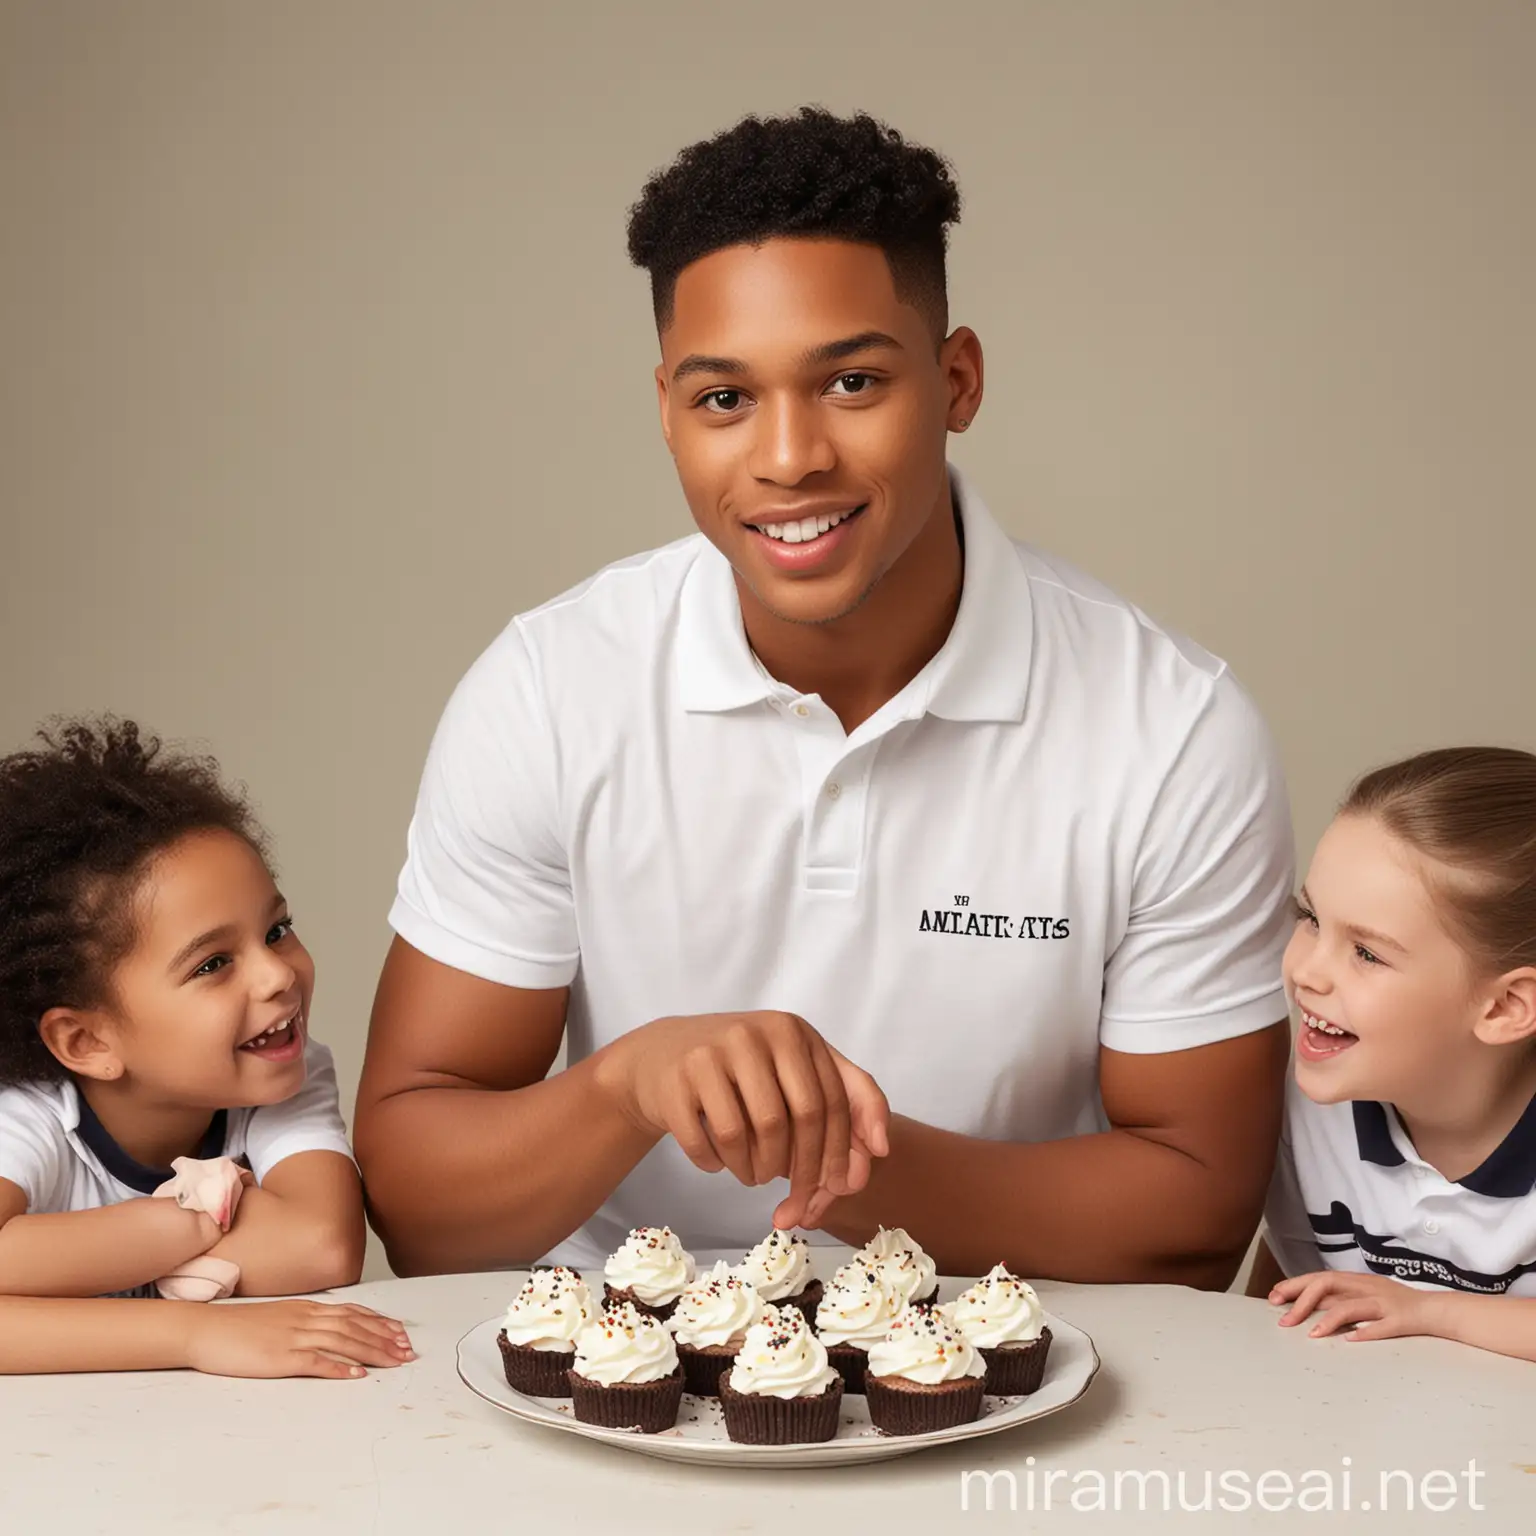 Young Man Serving Sliced Cakes and Milkshakes to Children at Mix Treatz Event